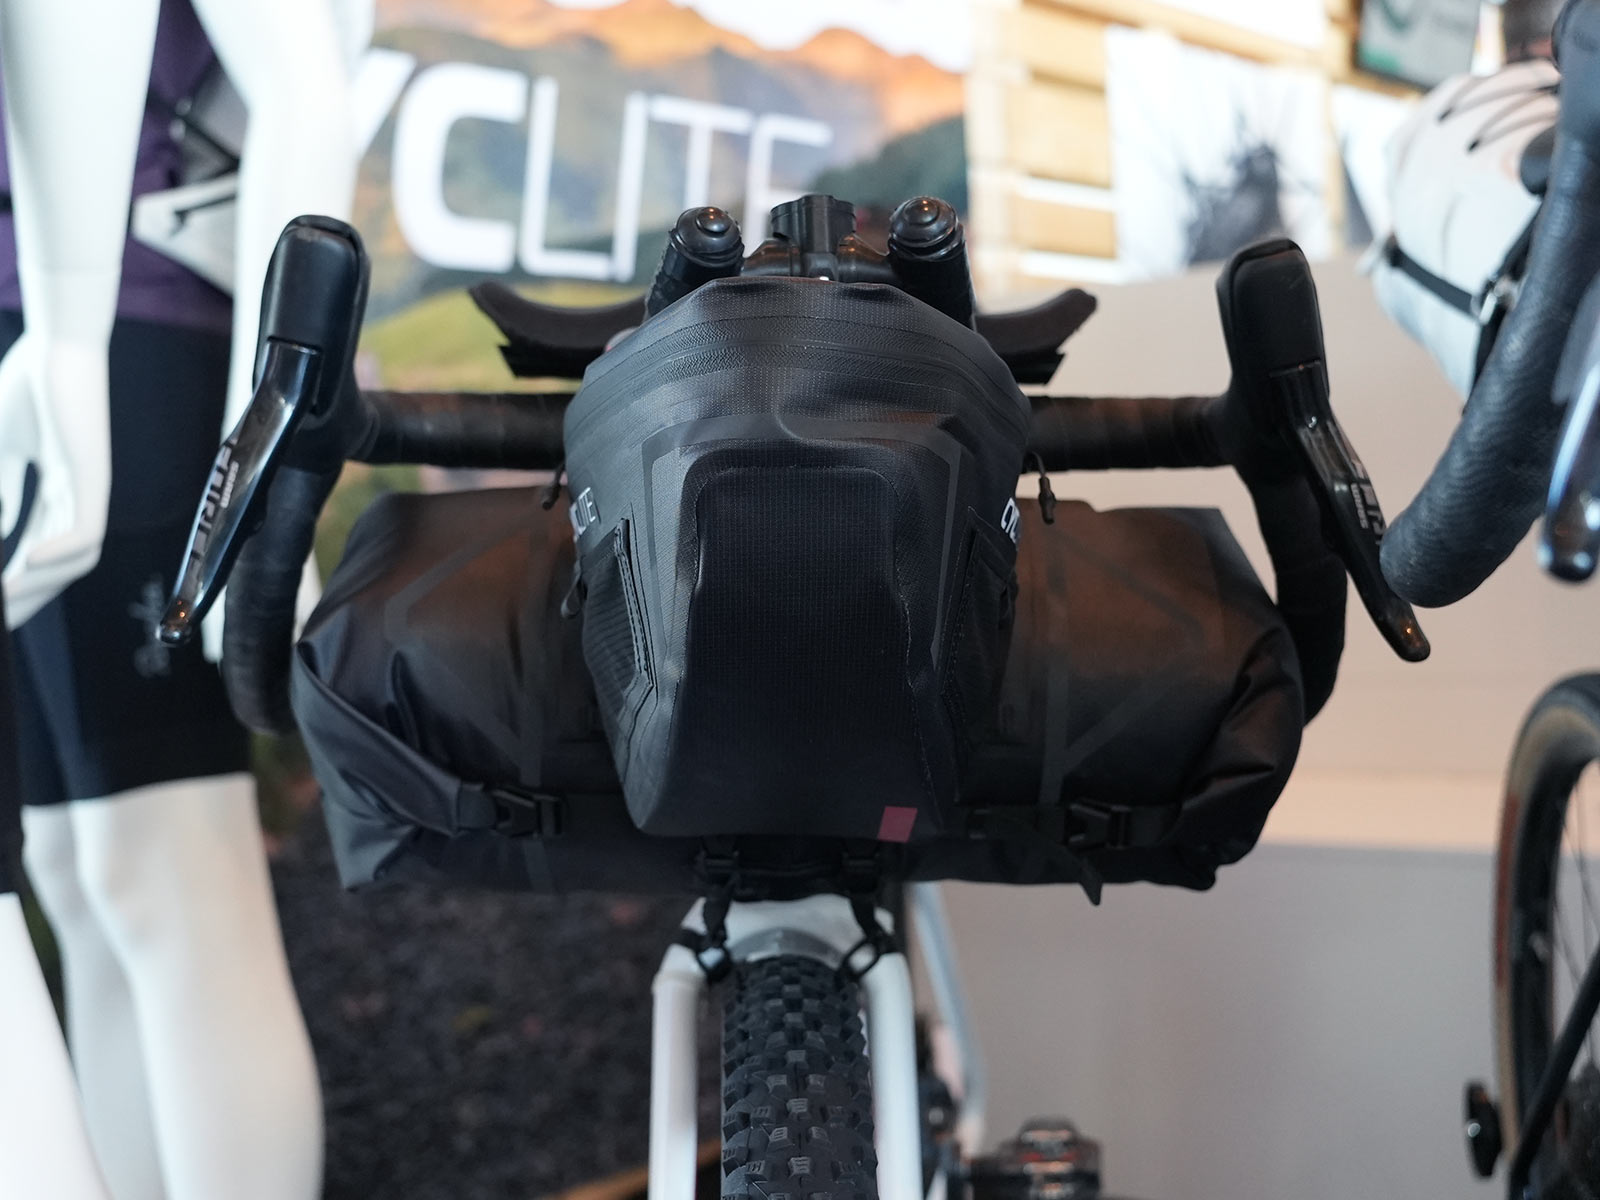 cyclite ultralight frame bags for bikepacking shown on a gravel touring bicycle